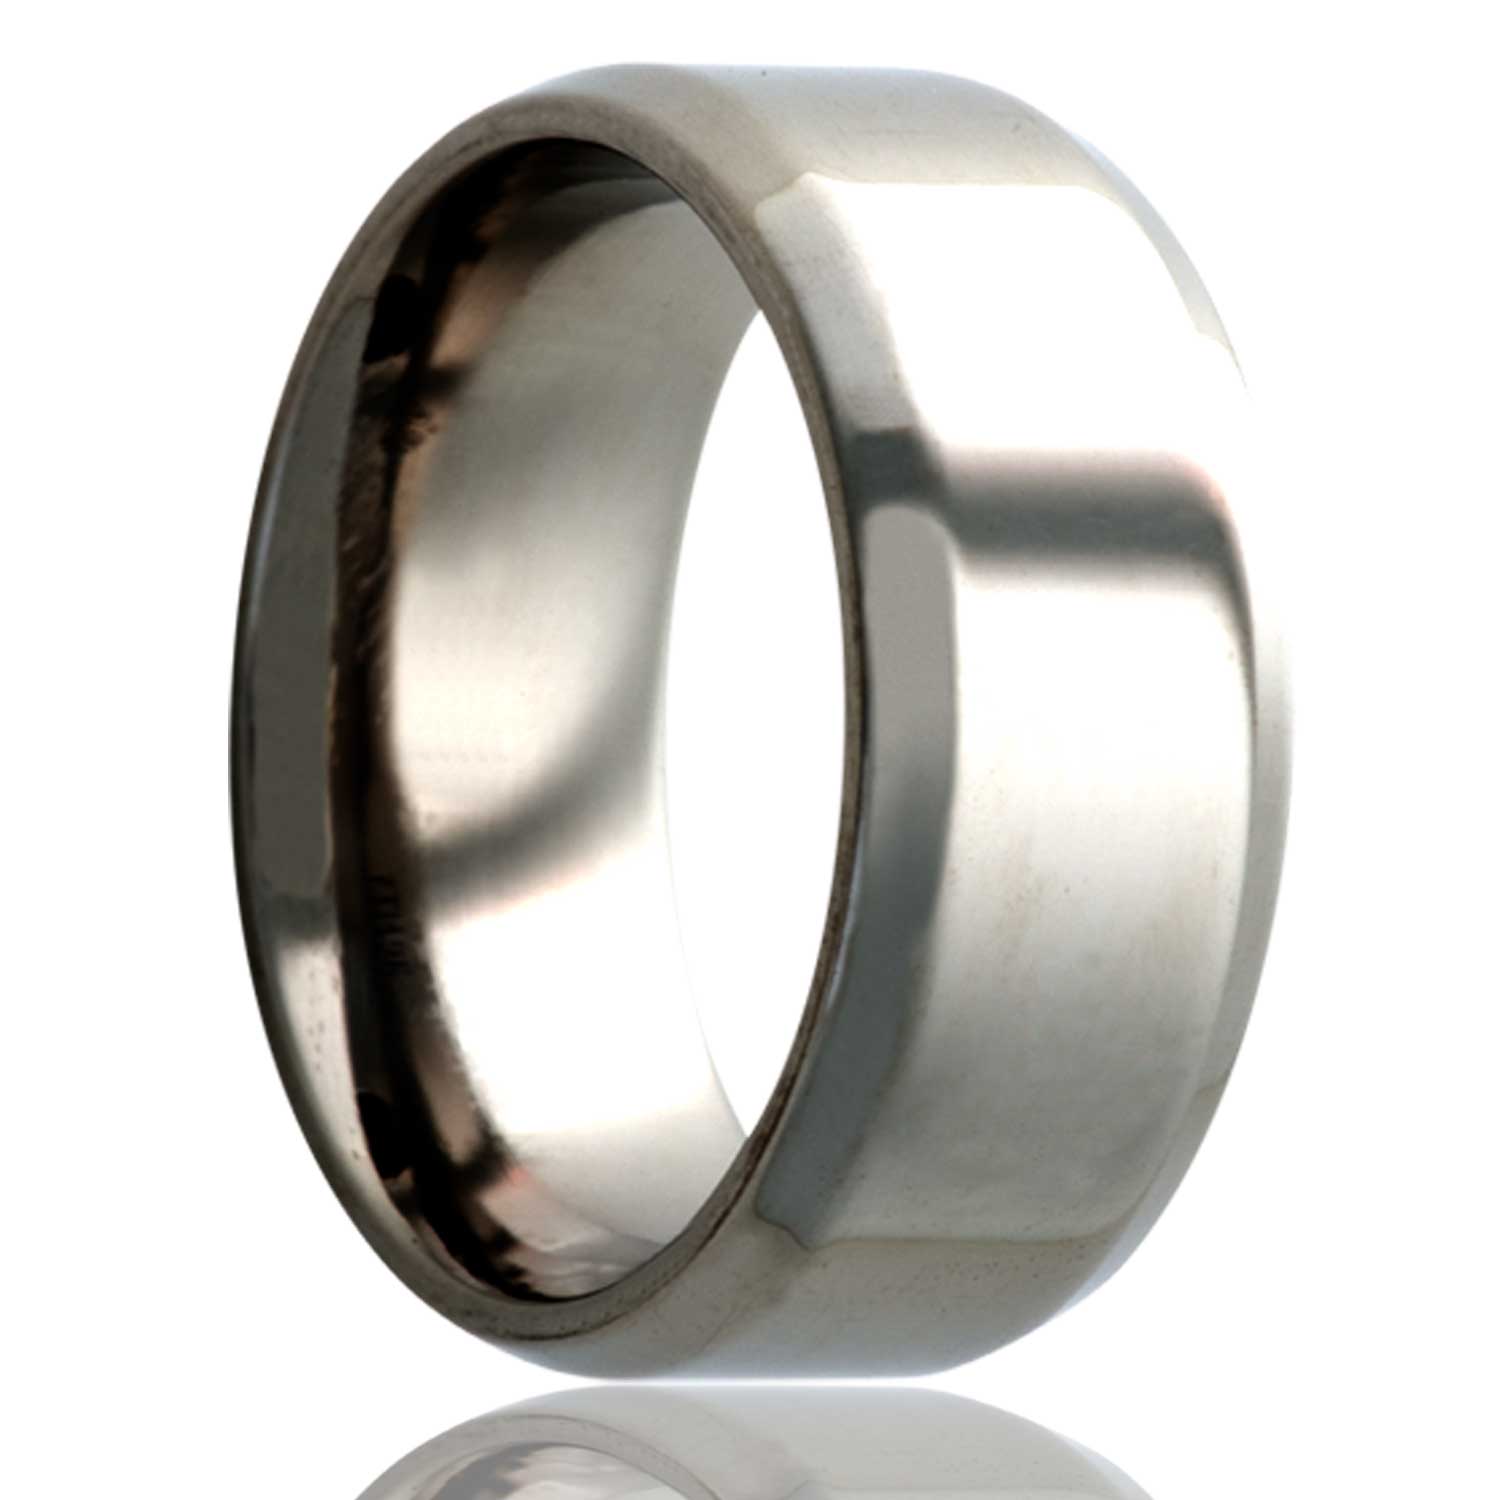 A intersecting grooves titanium wedding band with beveled edges displayed on a neutral white background.